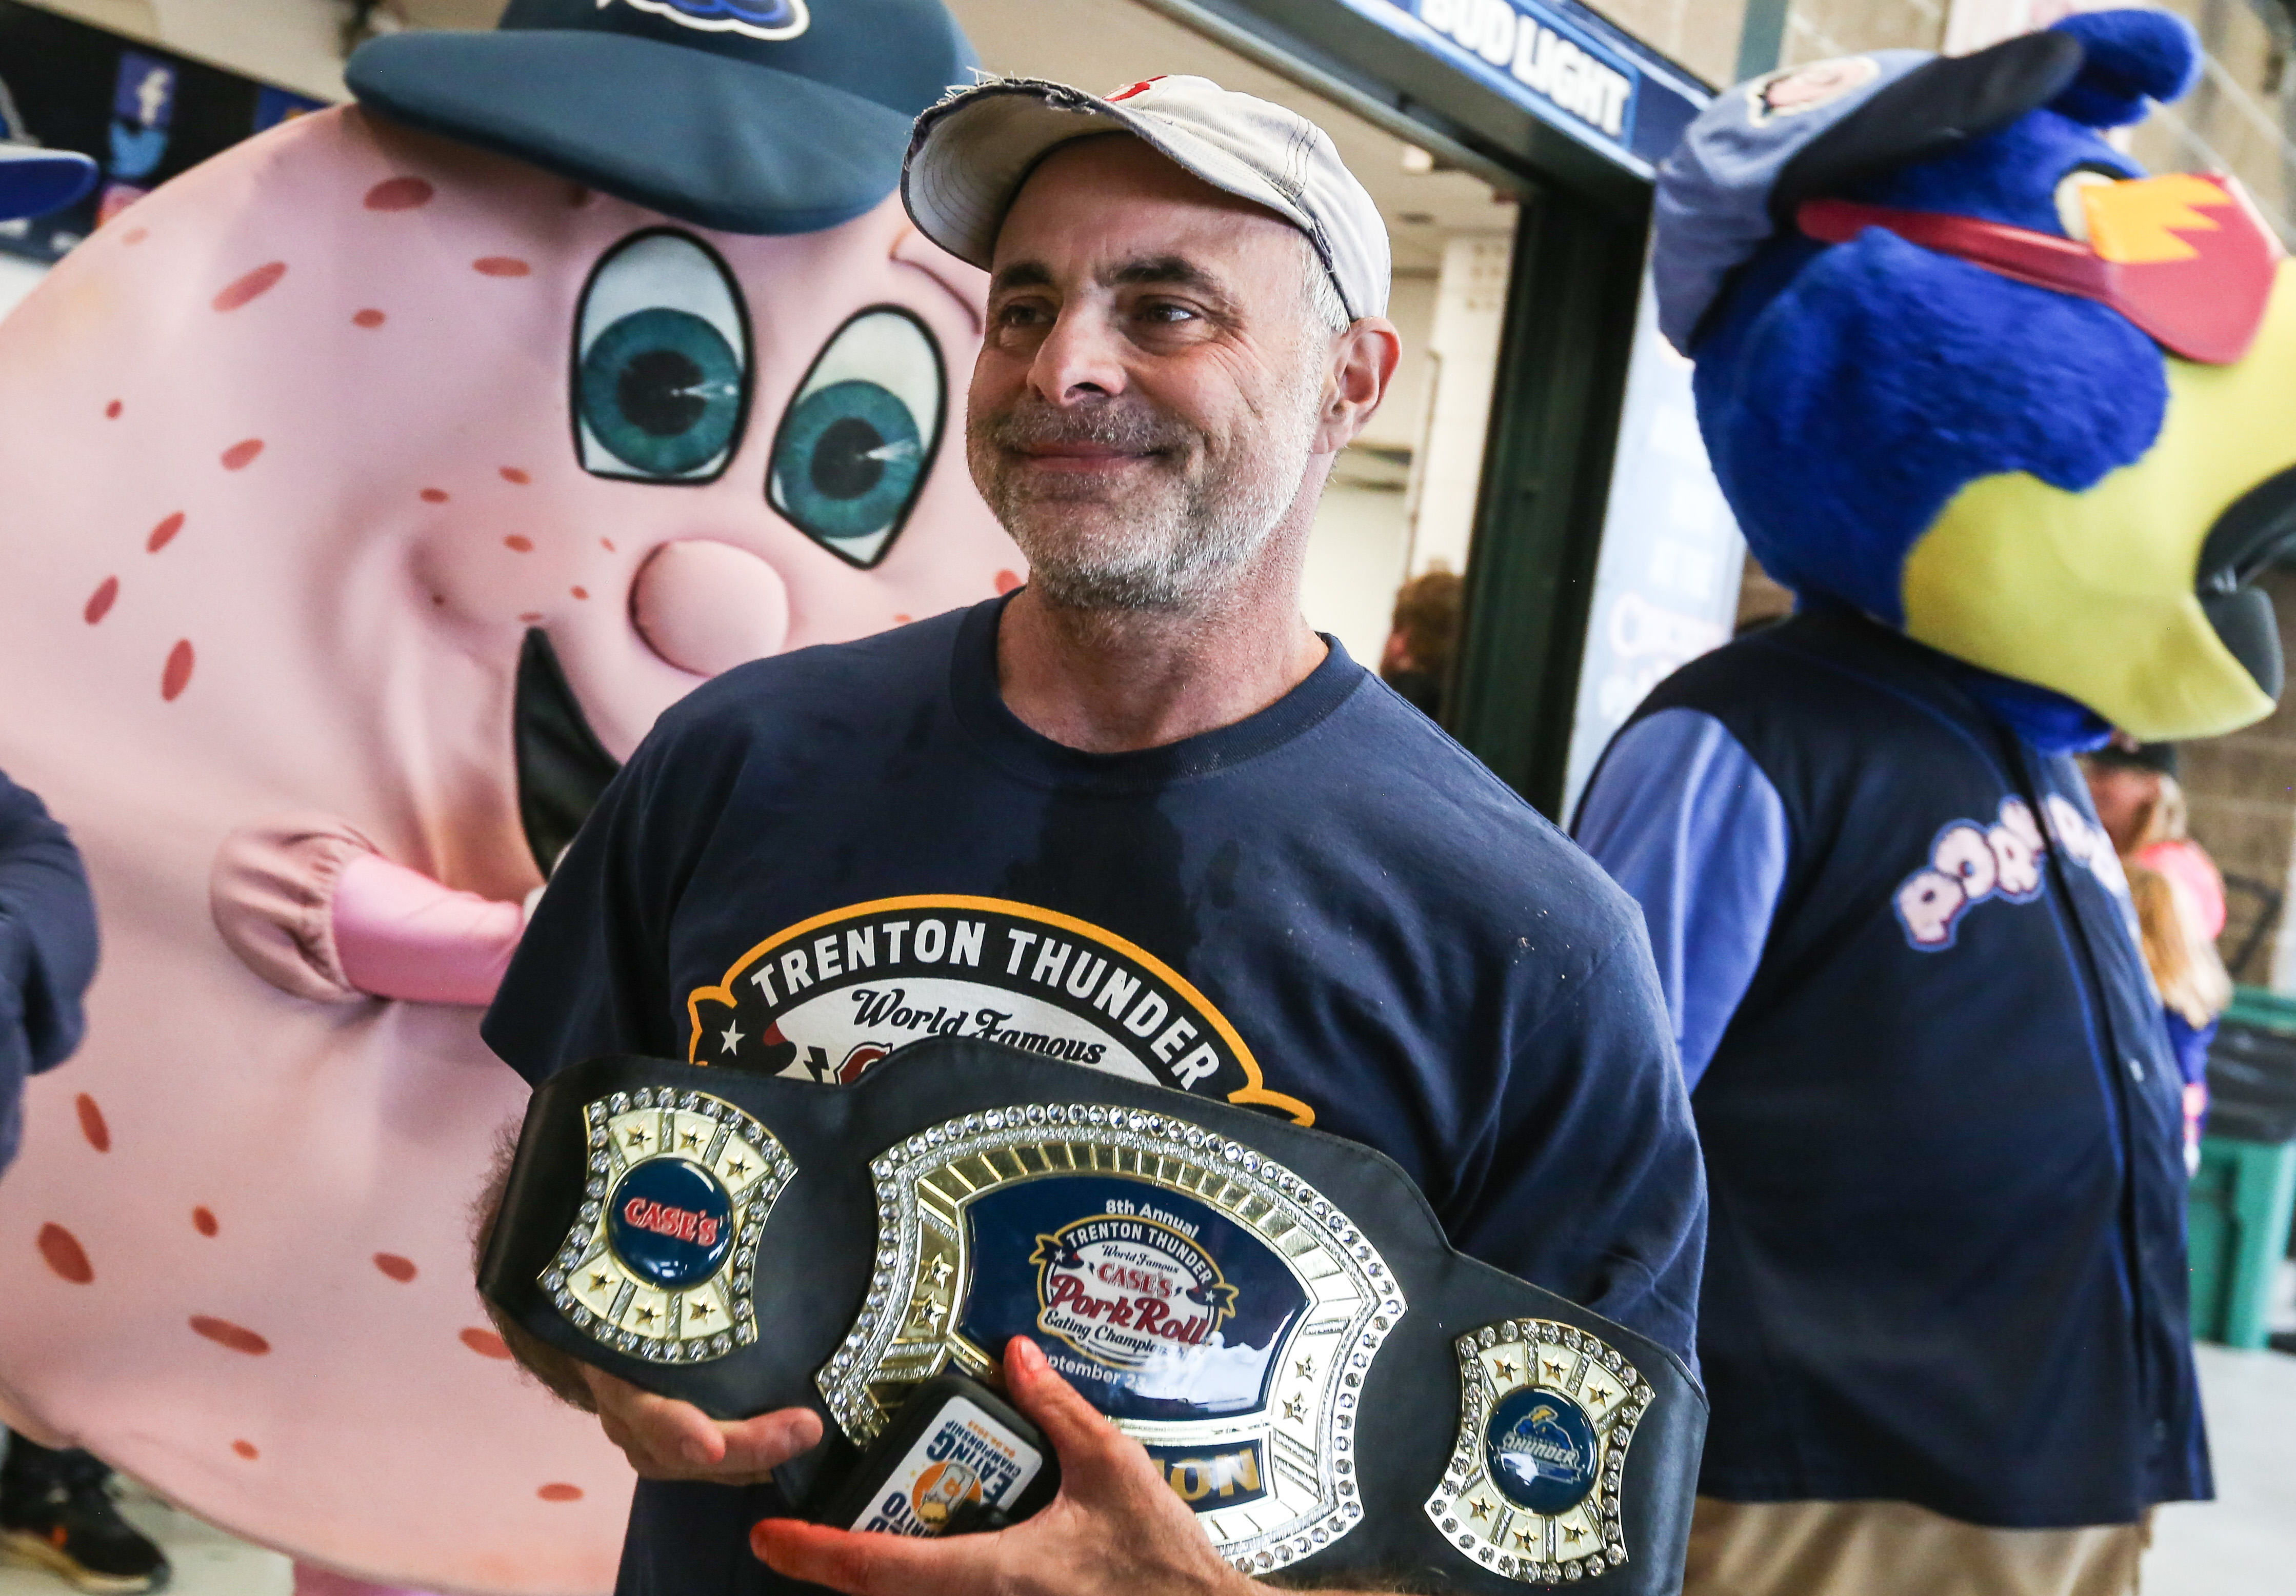 The Trenton Thunder will celebrate their 25th anniversary by becoming the  Trenton Pork Roll